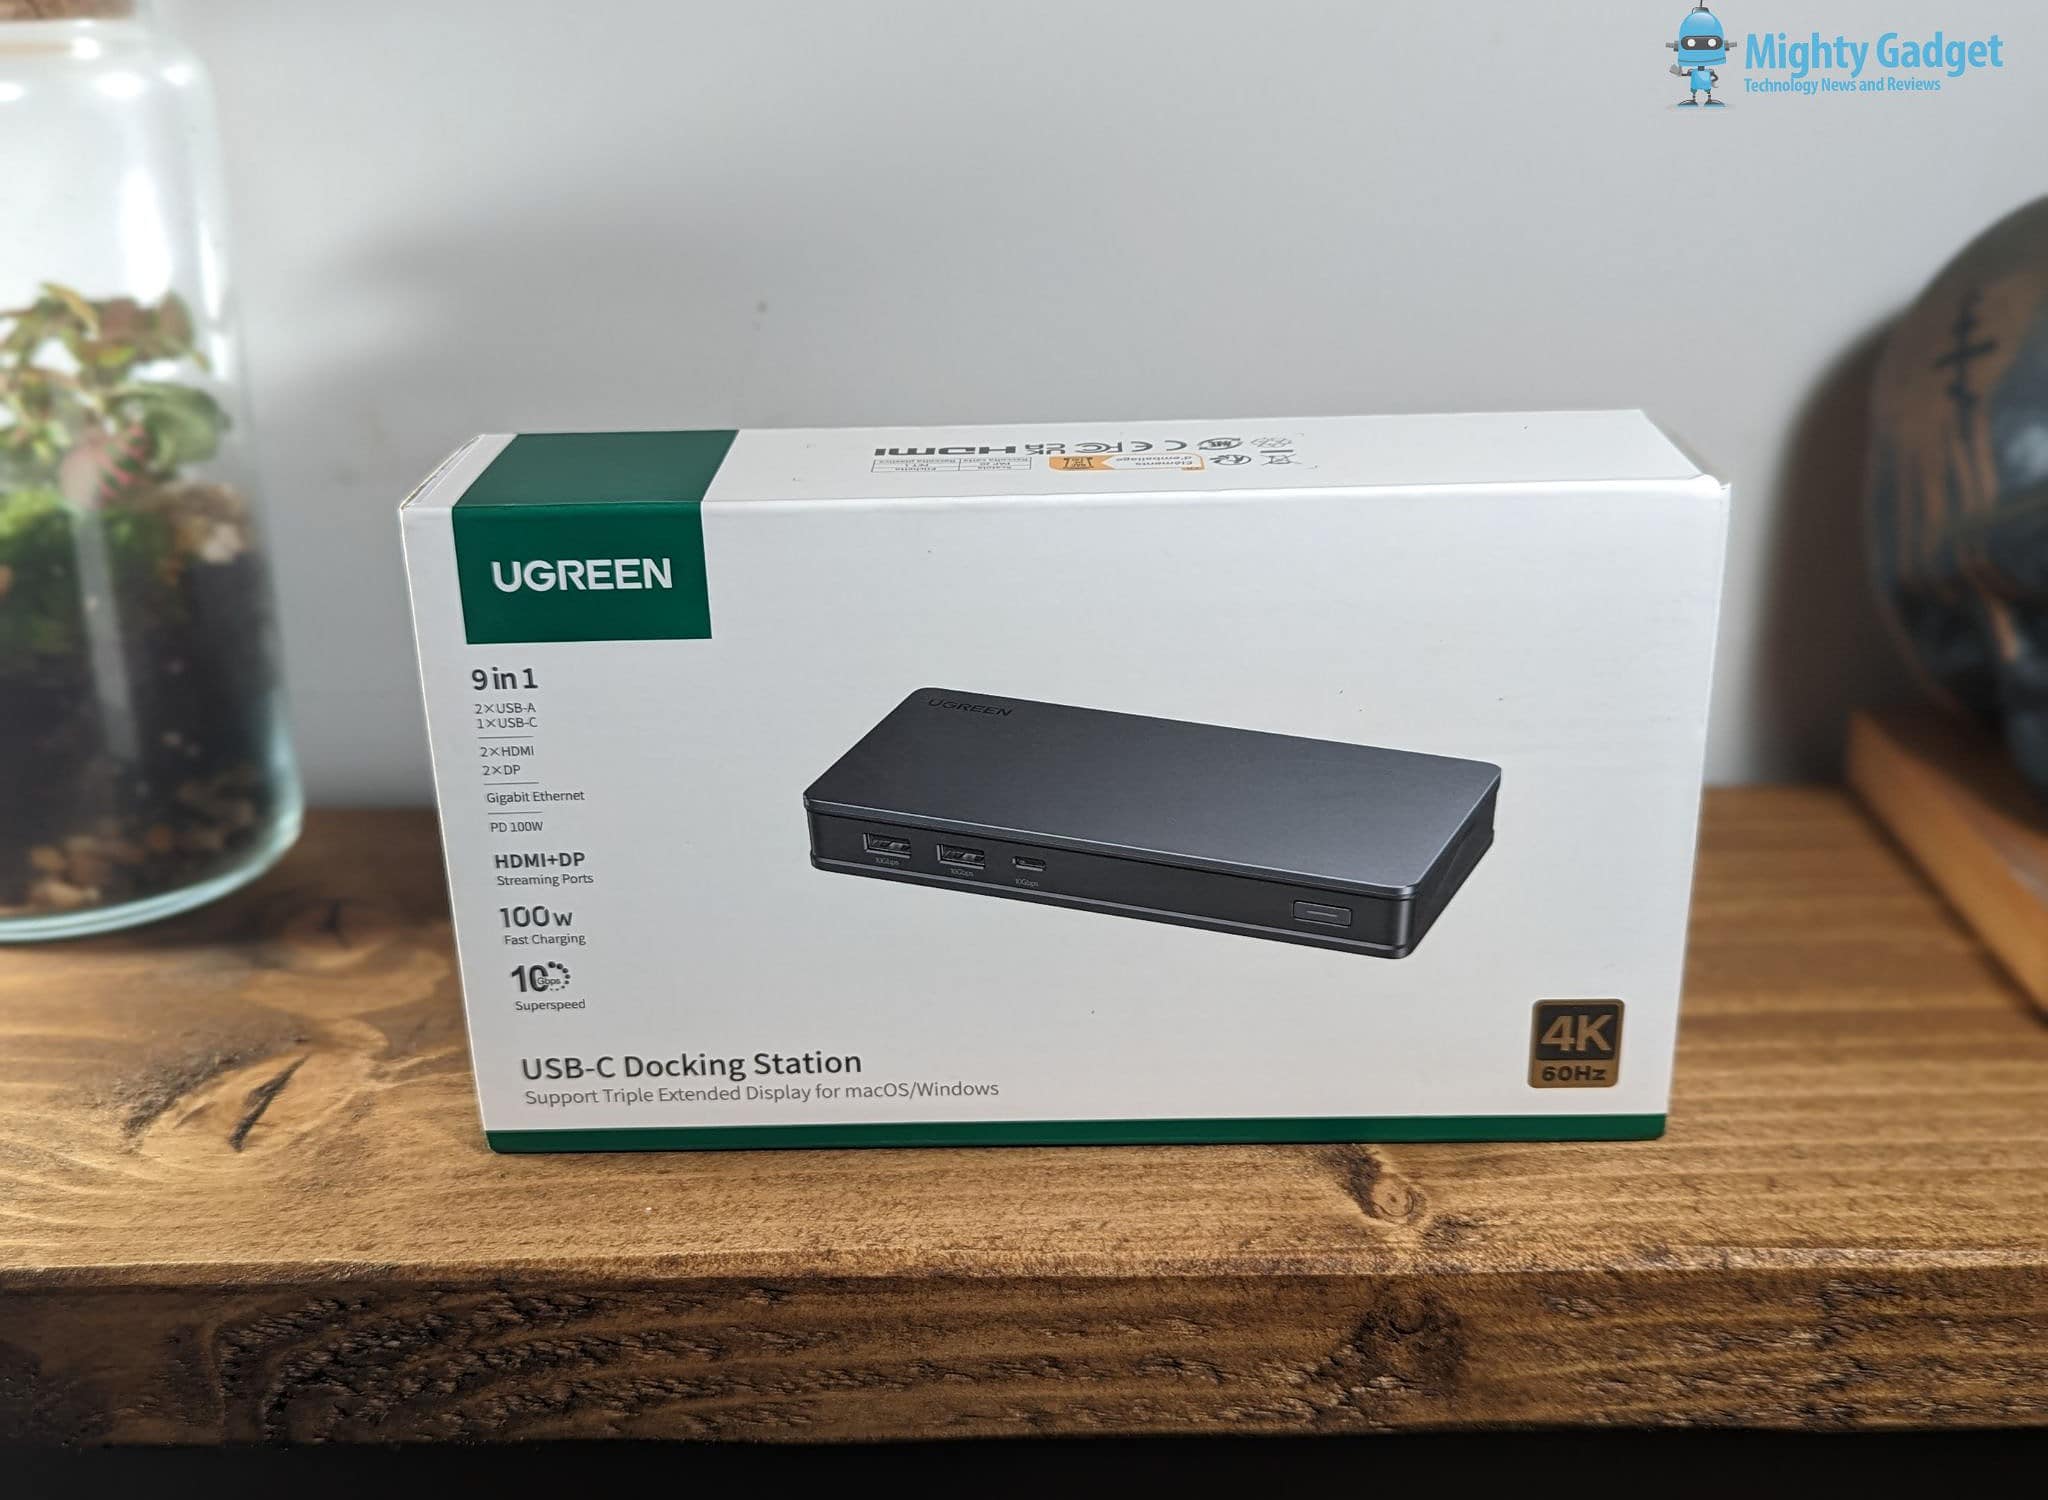 Ugreen 9 in 1 USB-C Docking Station Review – Probably the best option on the market (for me)